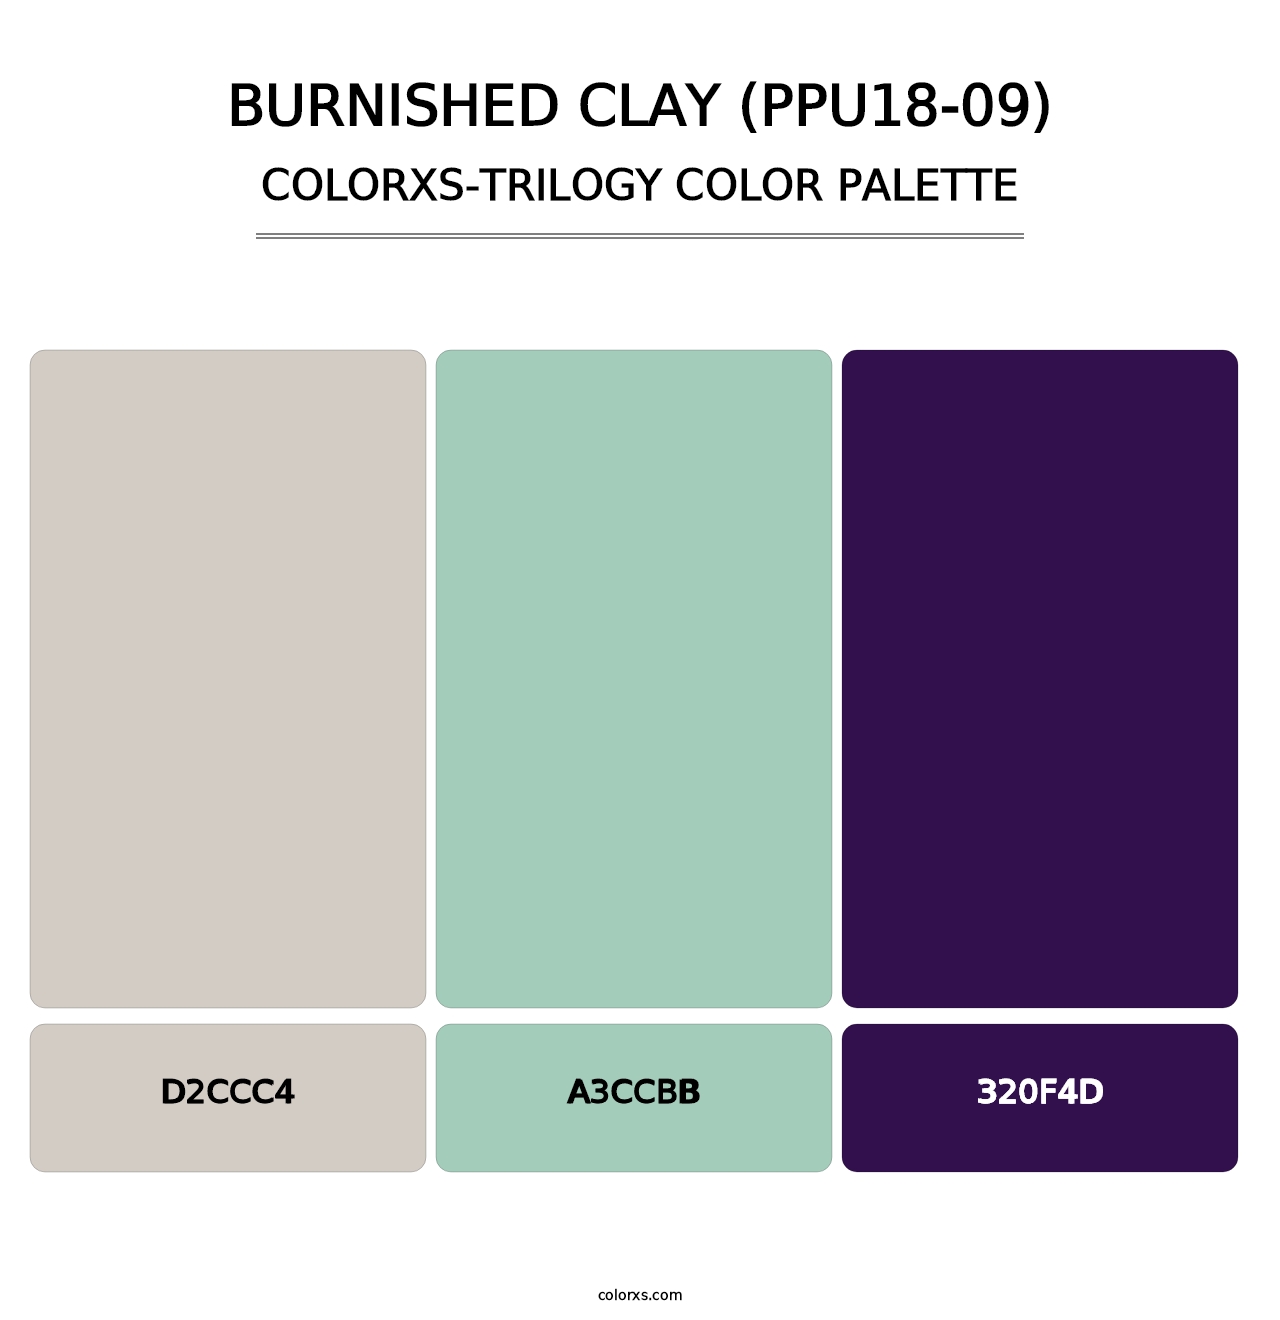 Burnished Clay (PPU18-09) - Colorxs Trilogy Palette